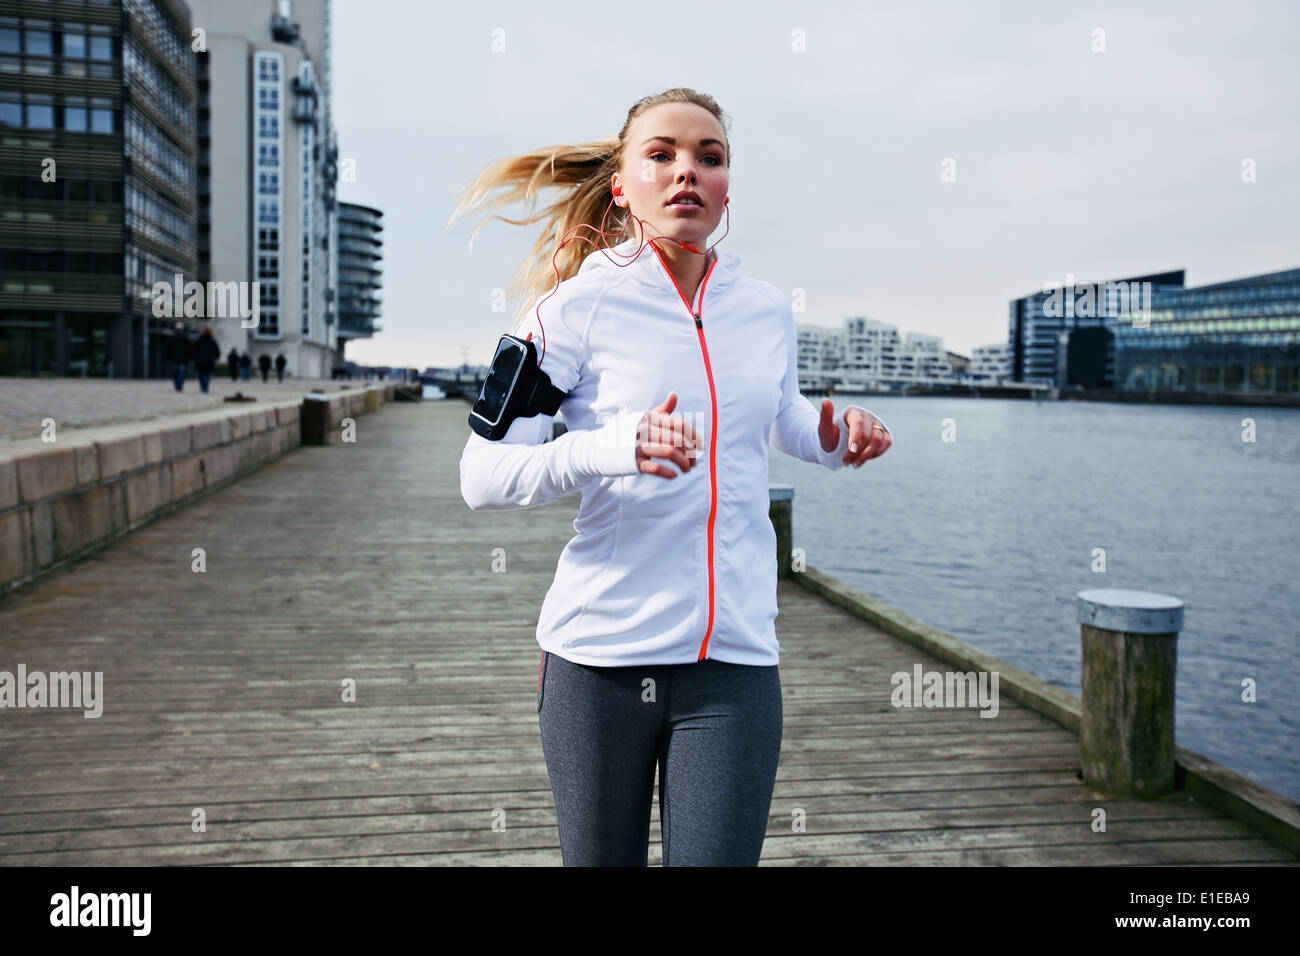 Fit young woman running on the boardwalk along river. Caucasian female athlete training outdoors by the waterfront. Stock Photo